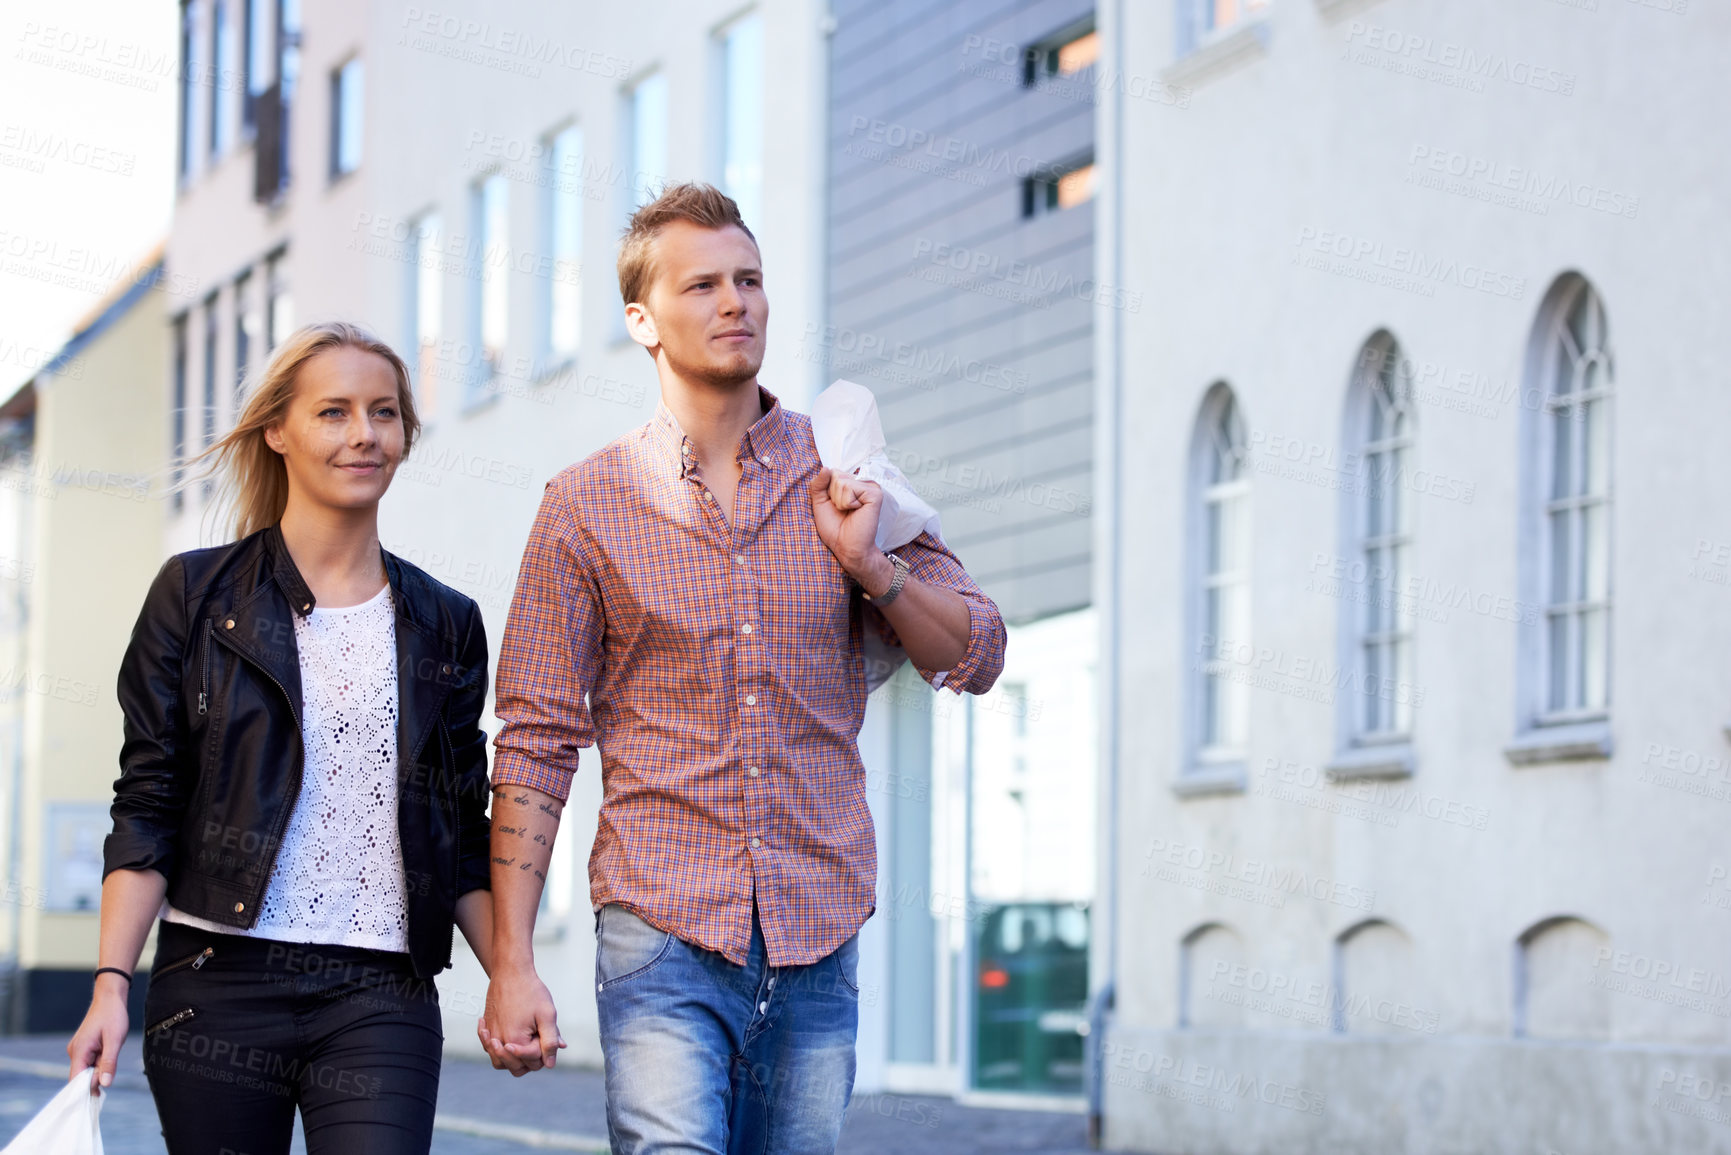 Buy stock photo A happy young couple walking hand in hand through the streets